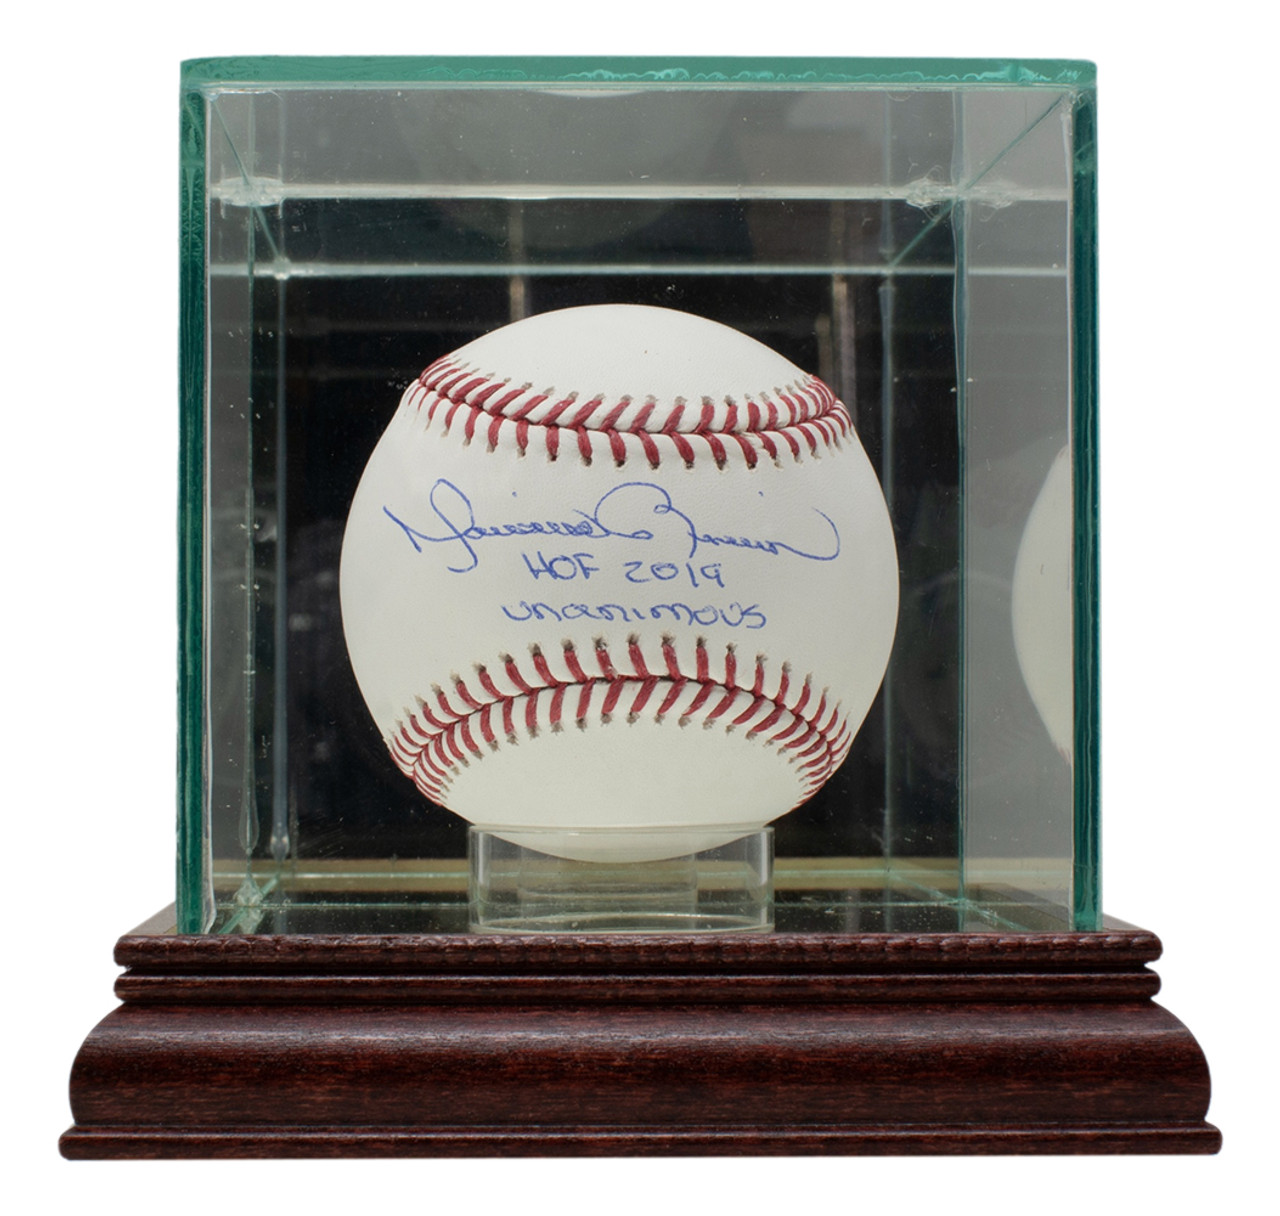 Mariano Rivera Autographed Baseball - New York Yankees Official MLB with  HOF 2019 Inscription